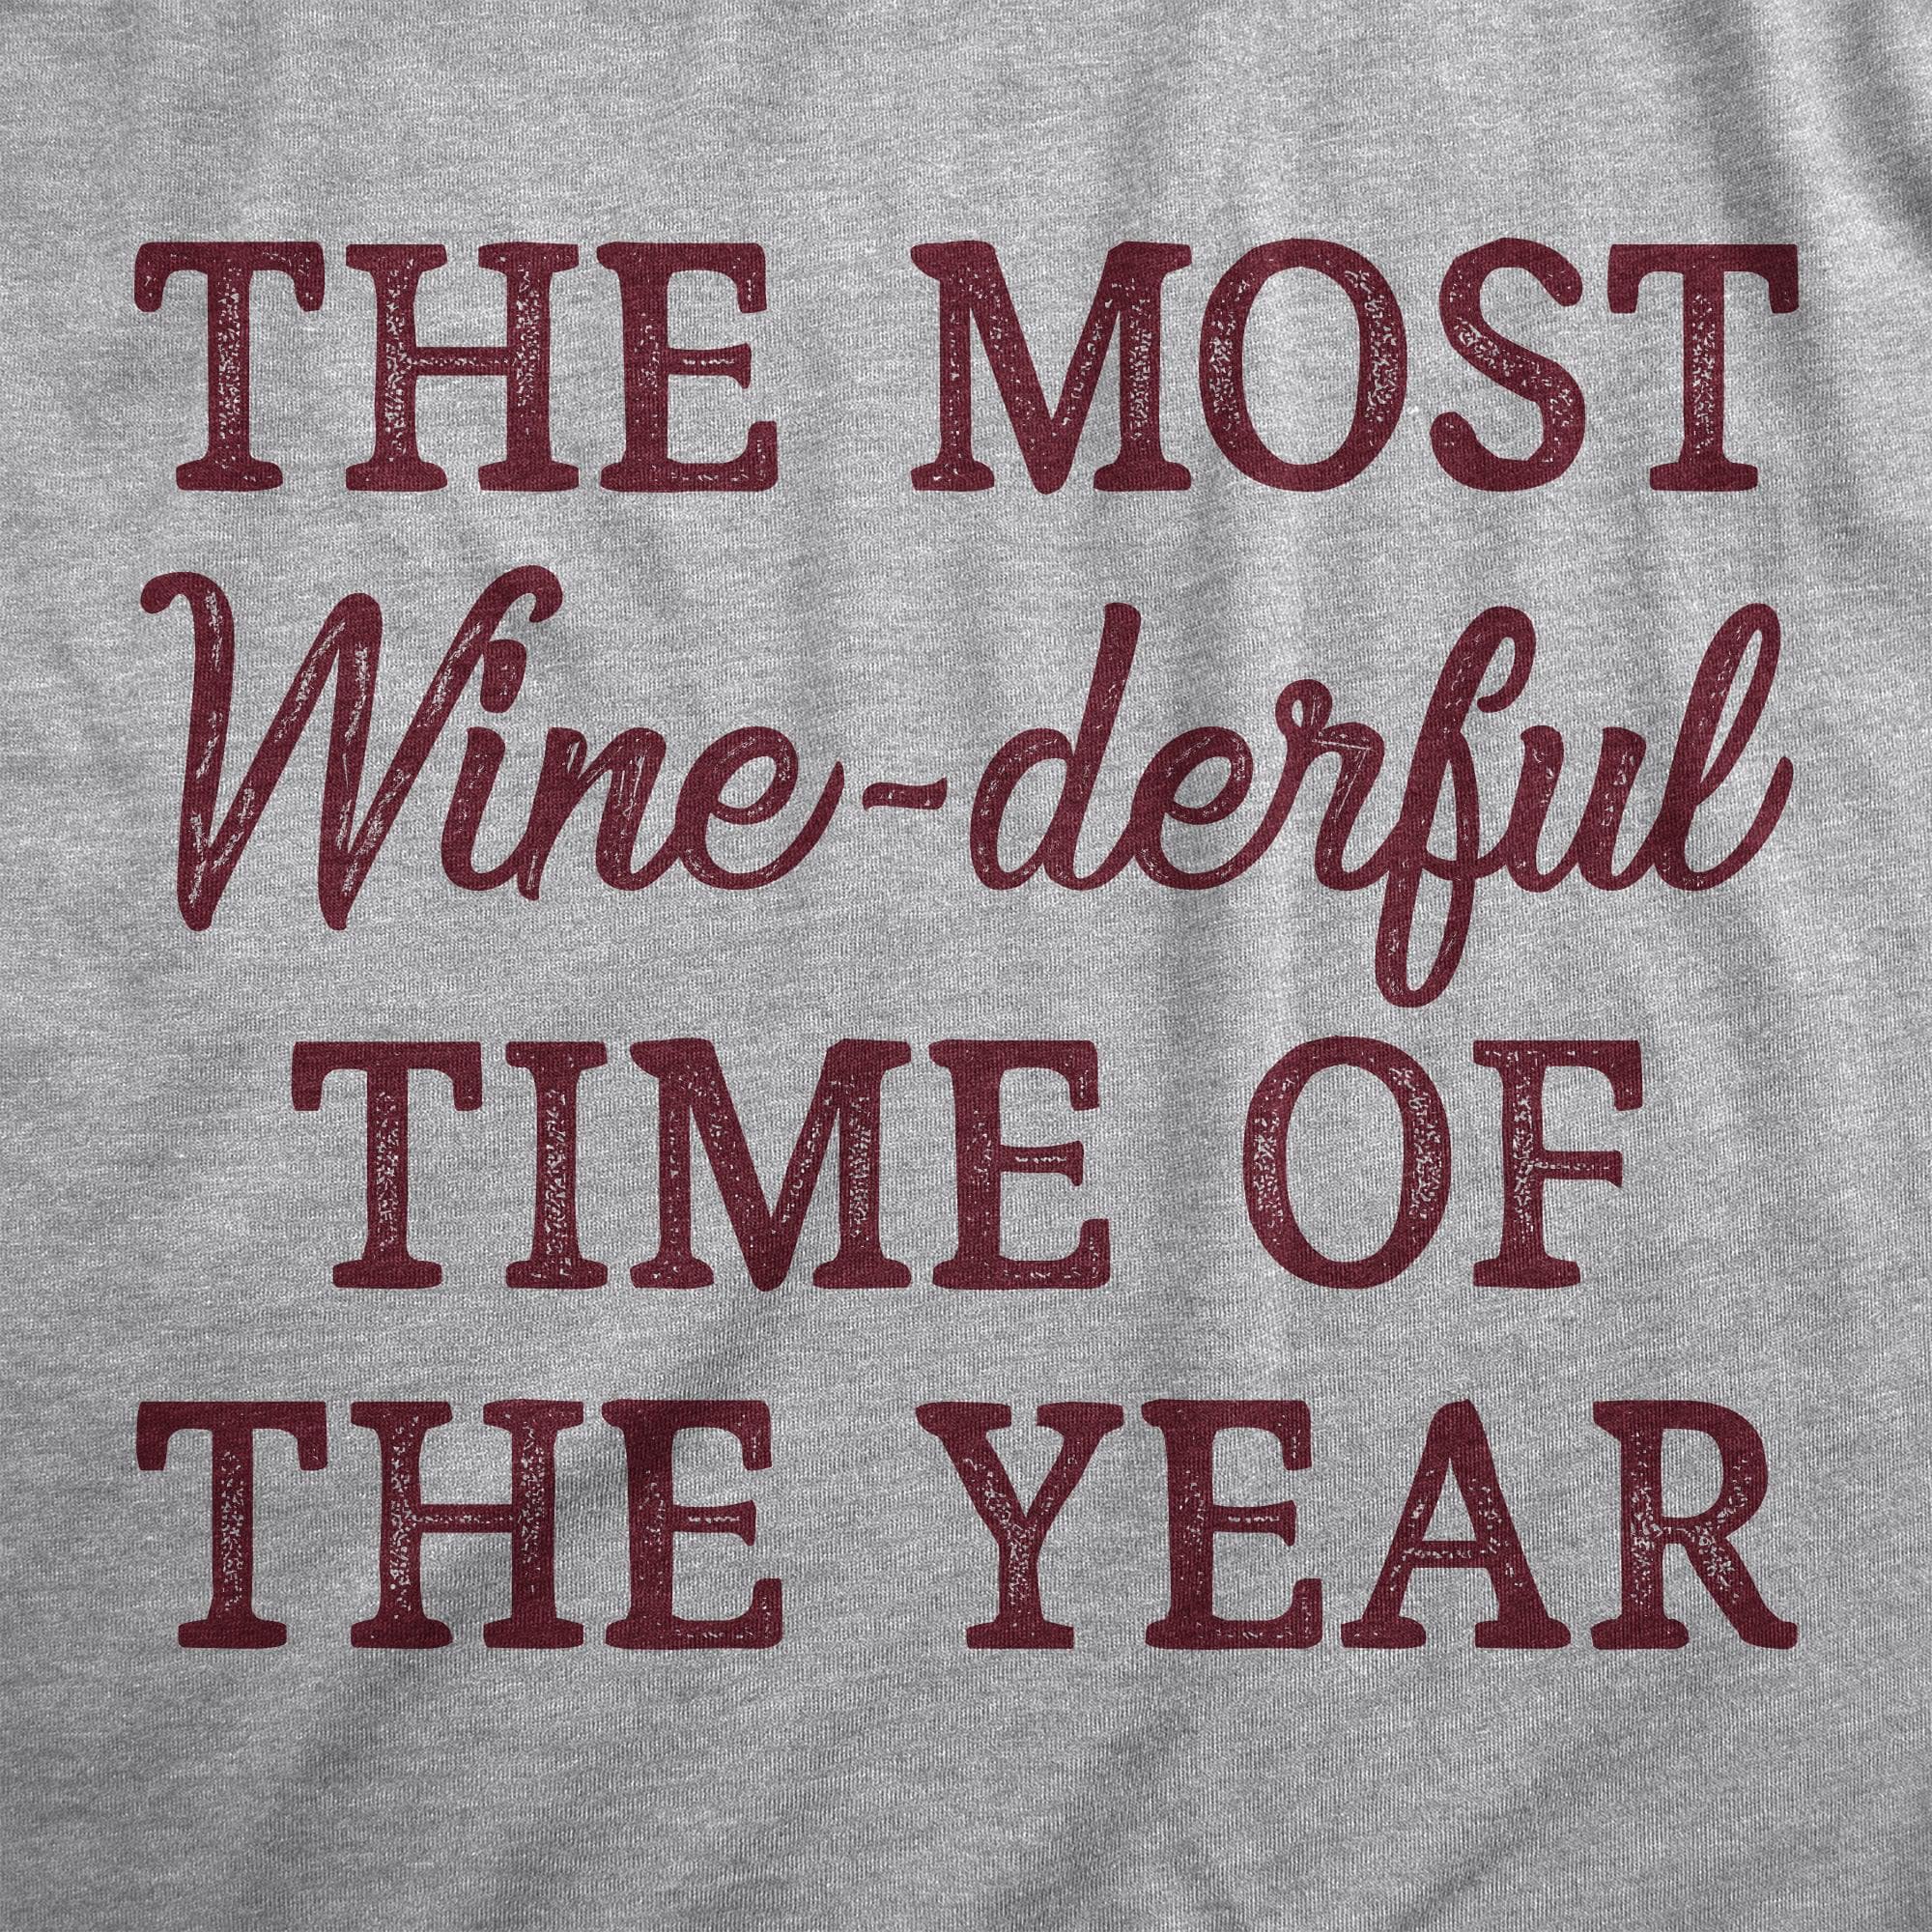 The Most Winederful Time Of The Year Men's Tshirt  -  Crazy Dog T-Shirts